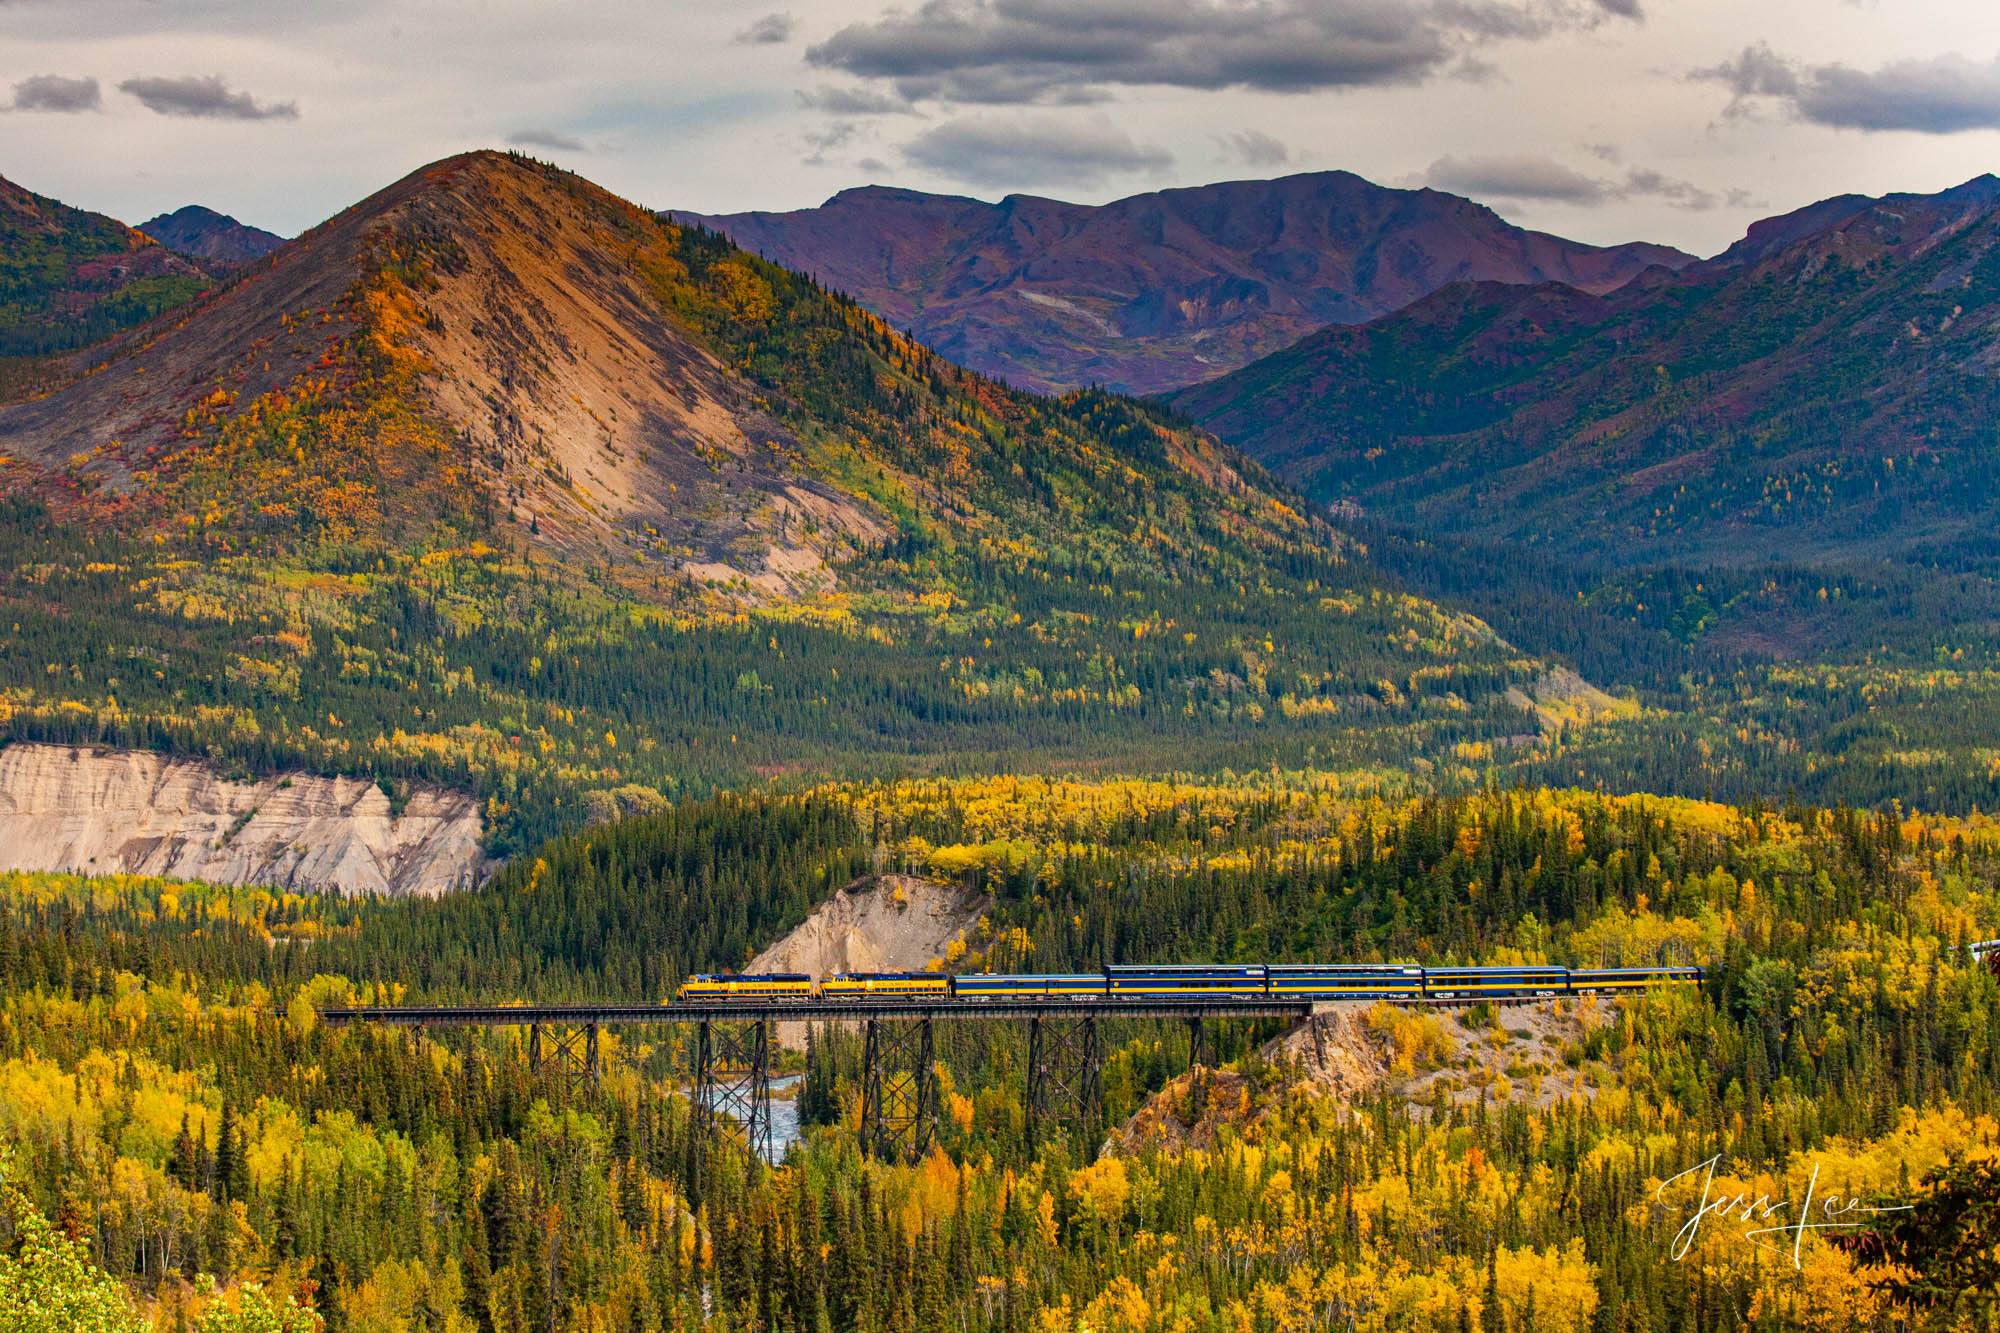 Train cars cross over the river flowing through a beautiful forest in Alaska. 